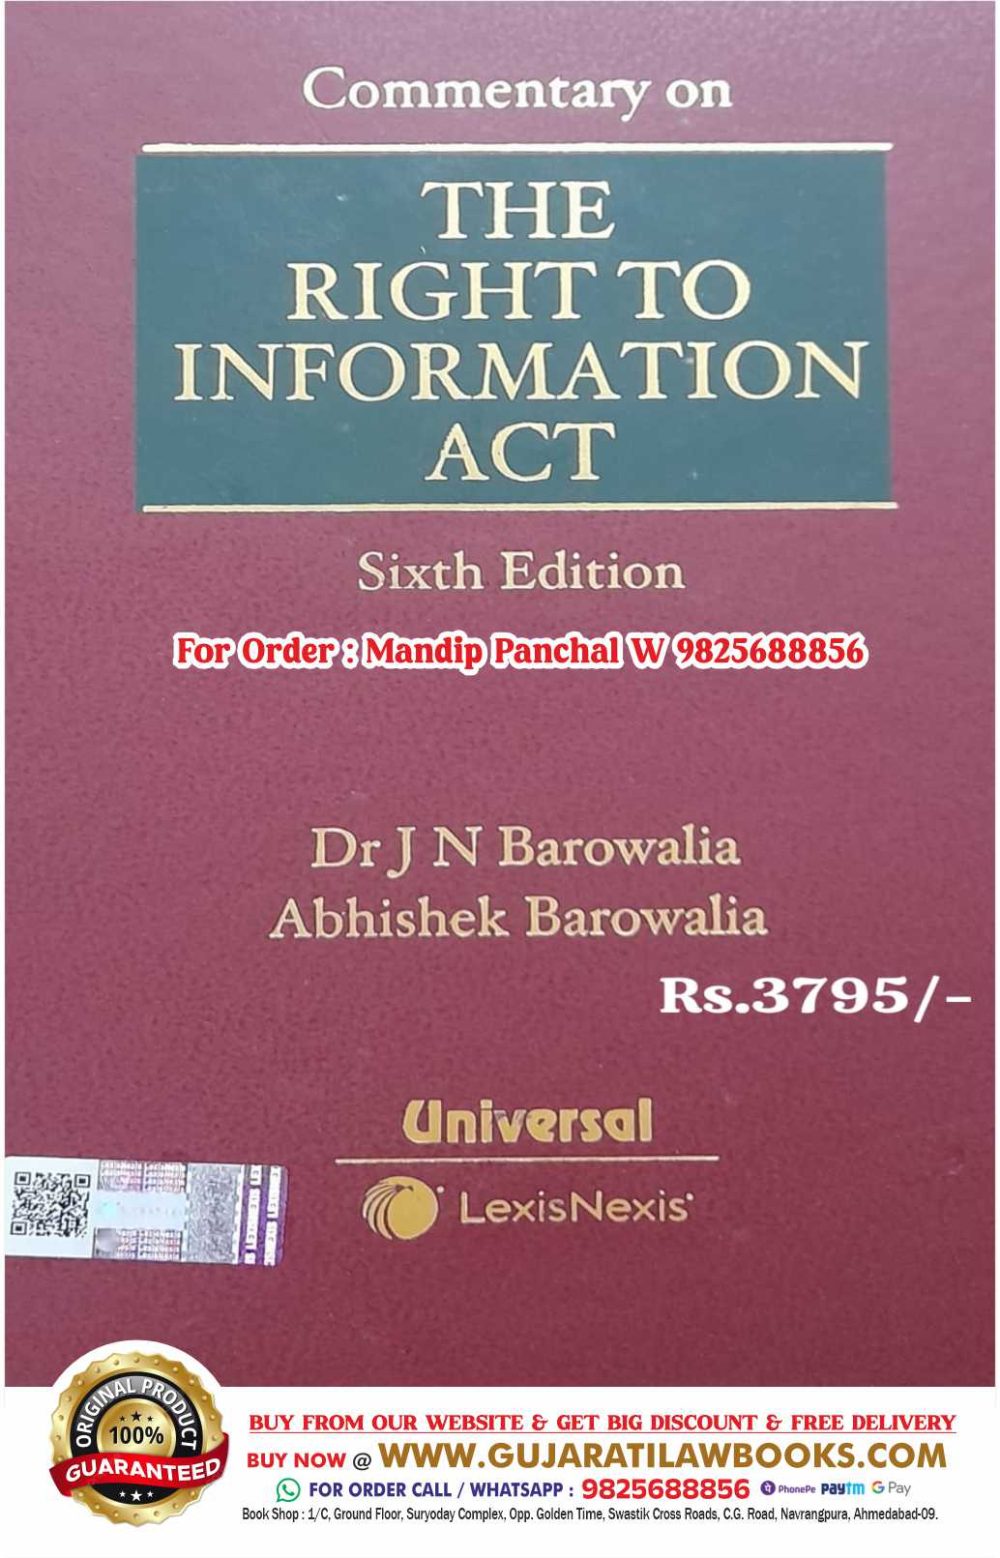 Commentary on THE RIGHT TO INFORMATION ACT - RTI - by Dr J N Barowalia - Latest March 2024 Edition Universal LexisNexis